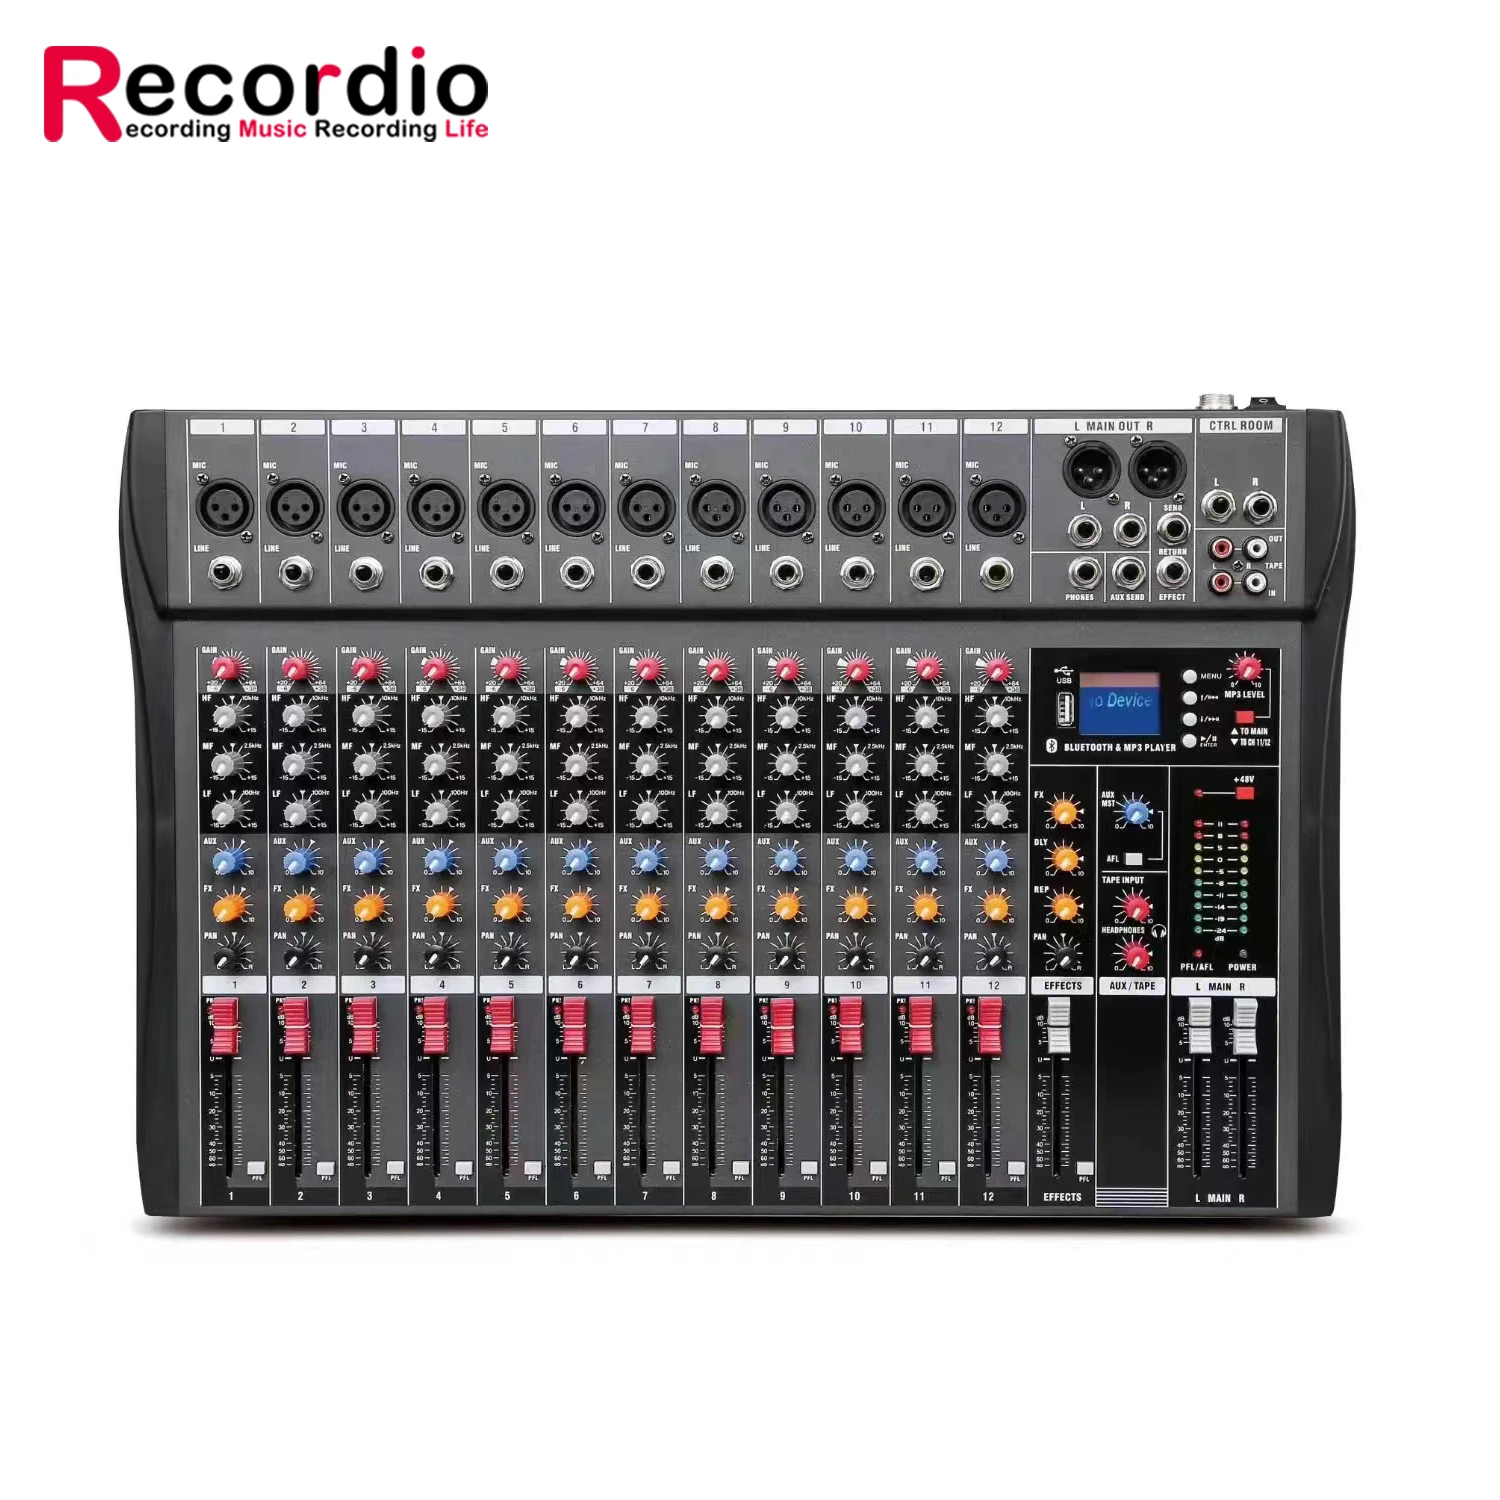 120S-USB 12 Channels Mic Line Audio Mixer Mixing Console USB XLR Input  3-band EQ 48V Phantom Power with Power Adapter